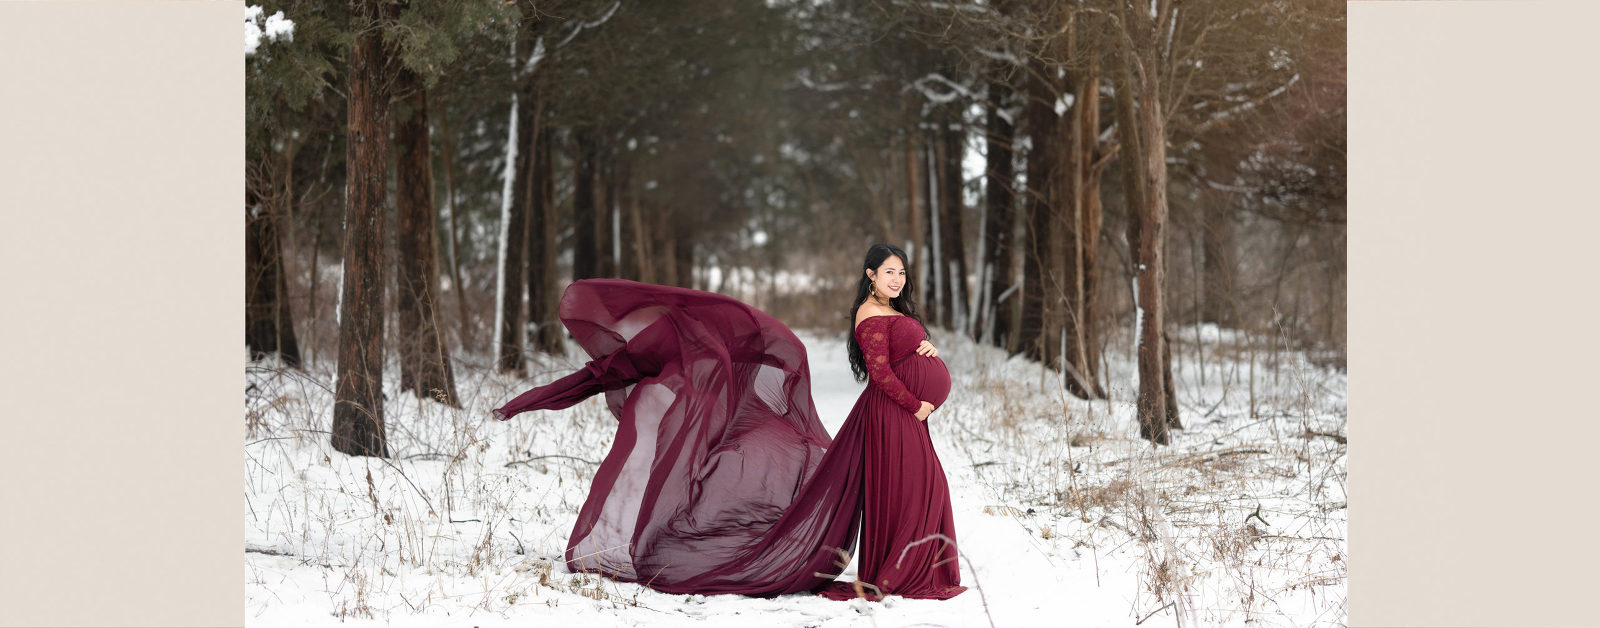 pregnant woman wearing red in tree lines forest in the snow